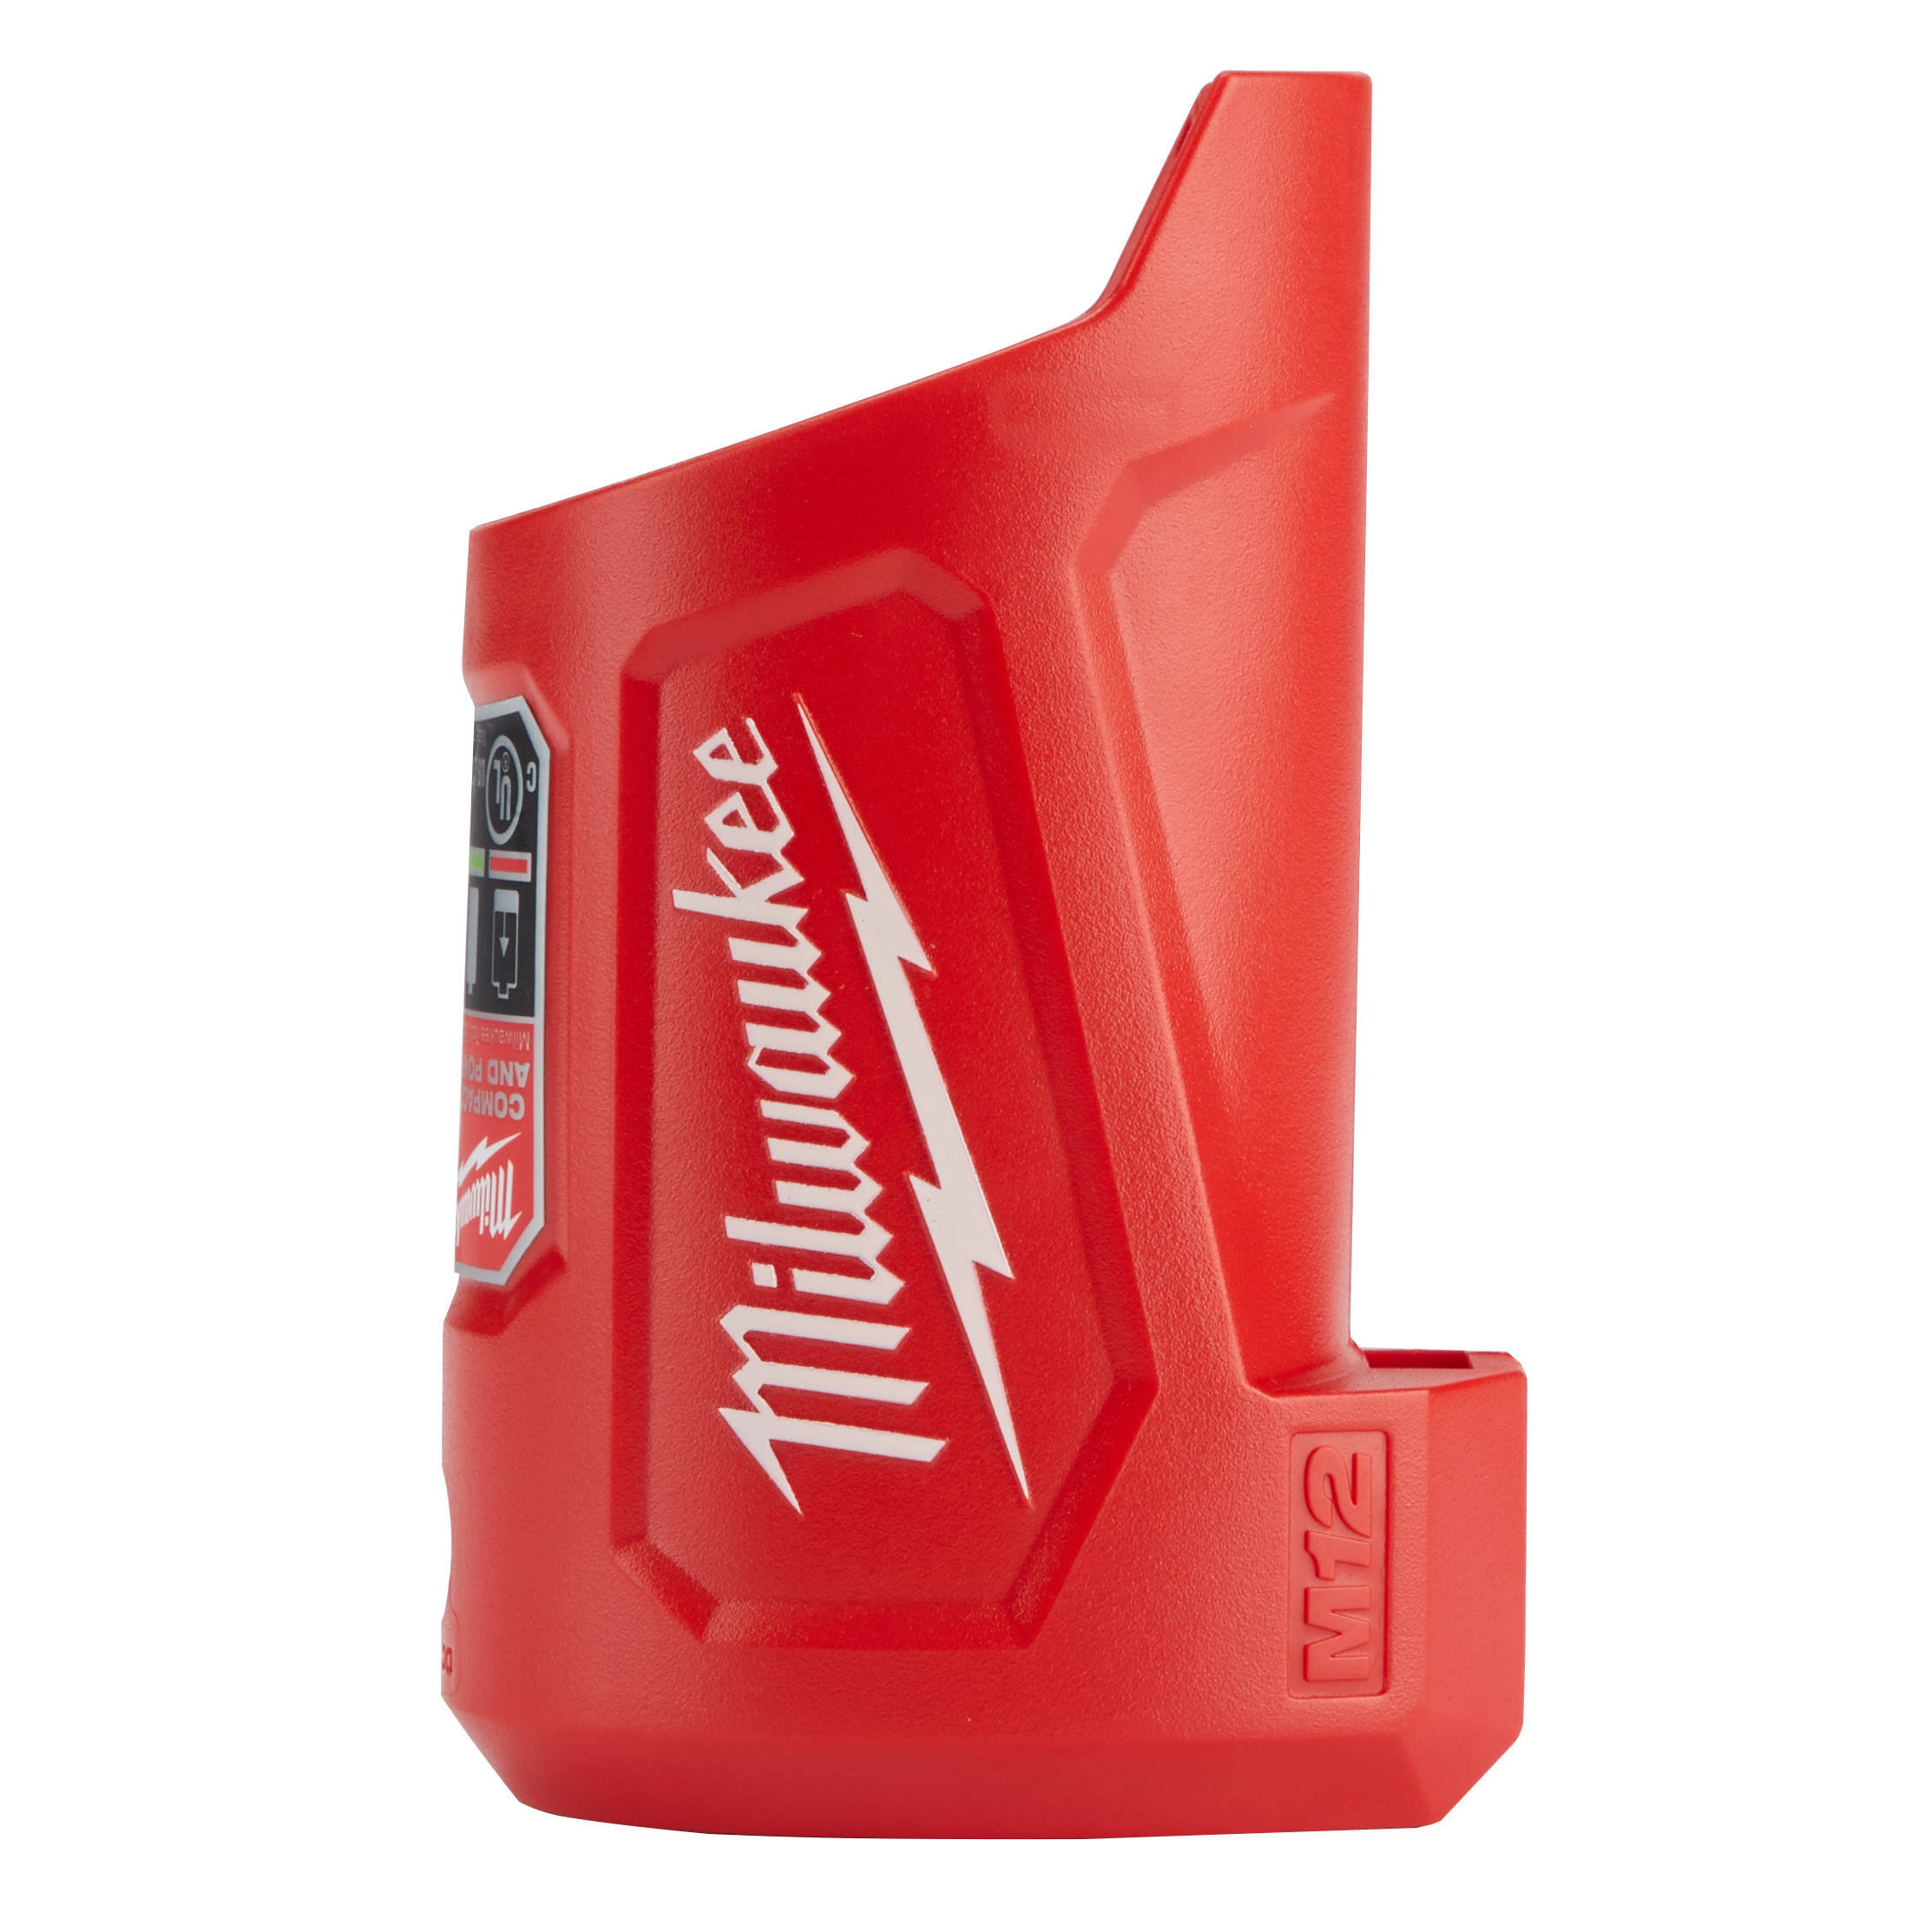 Milwaukee Lithium Ion Charger and Portable Power Source